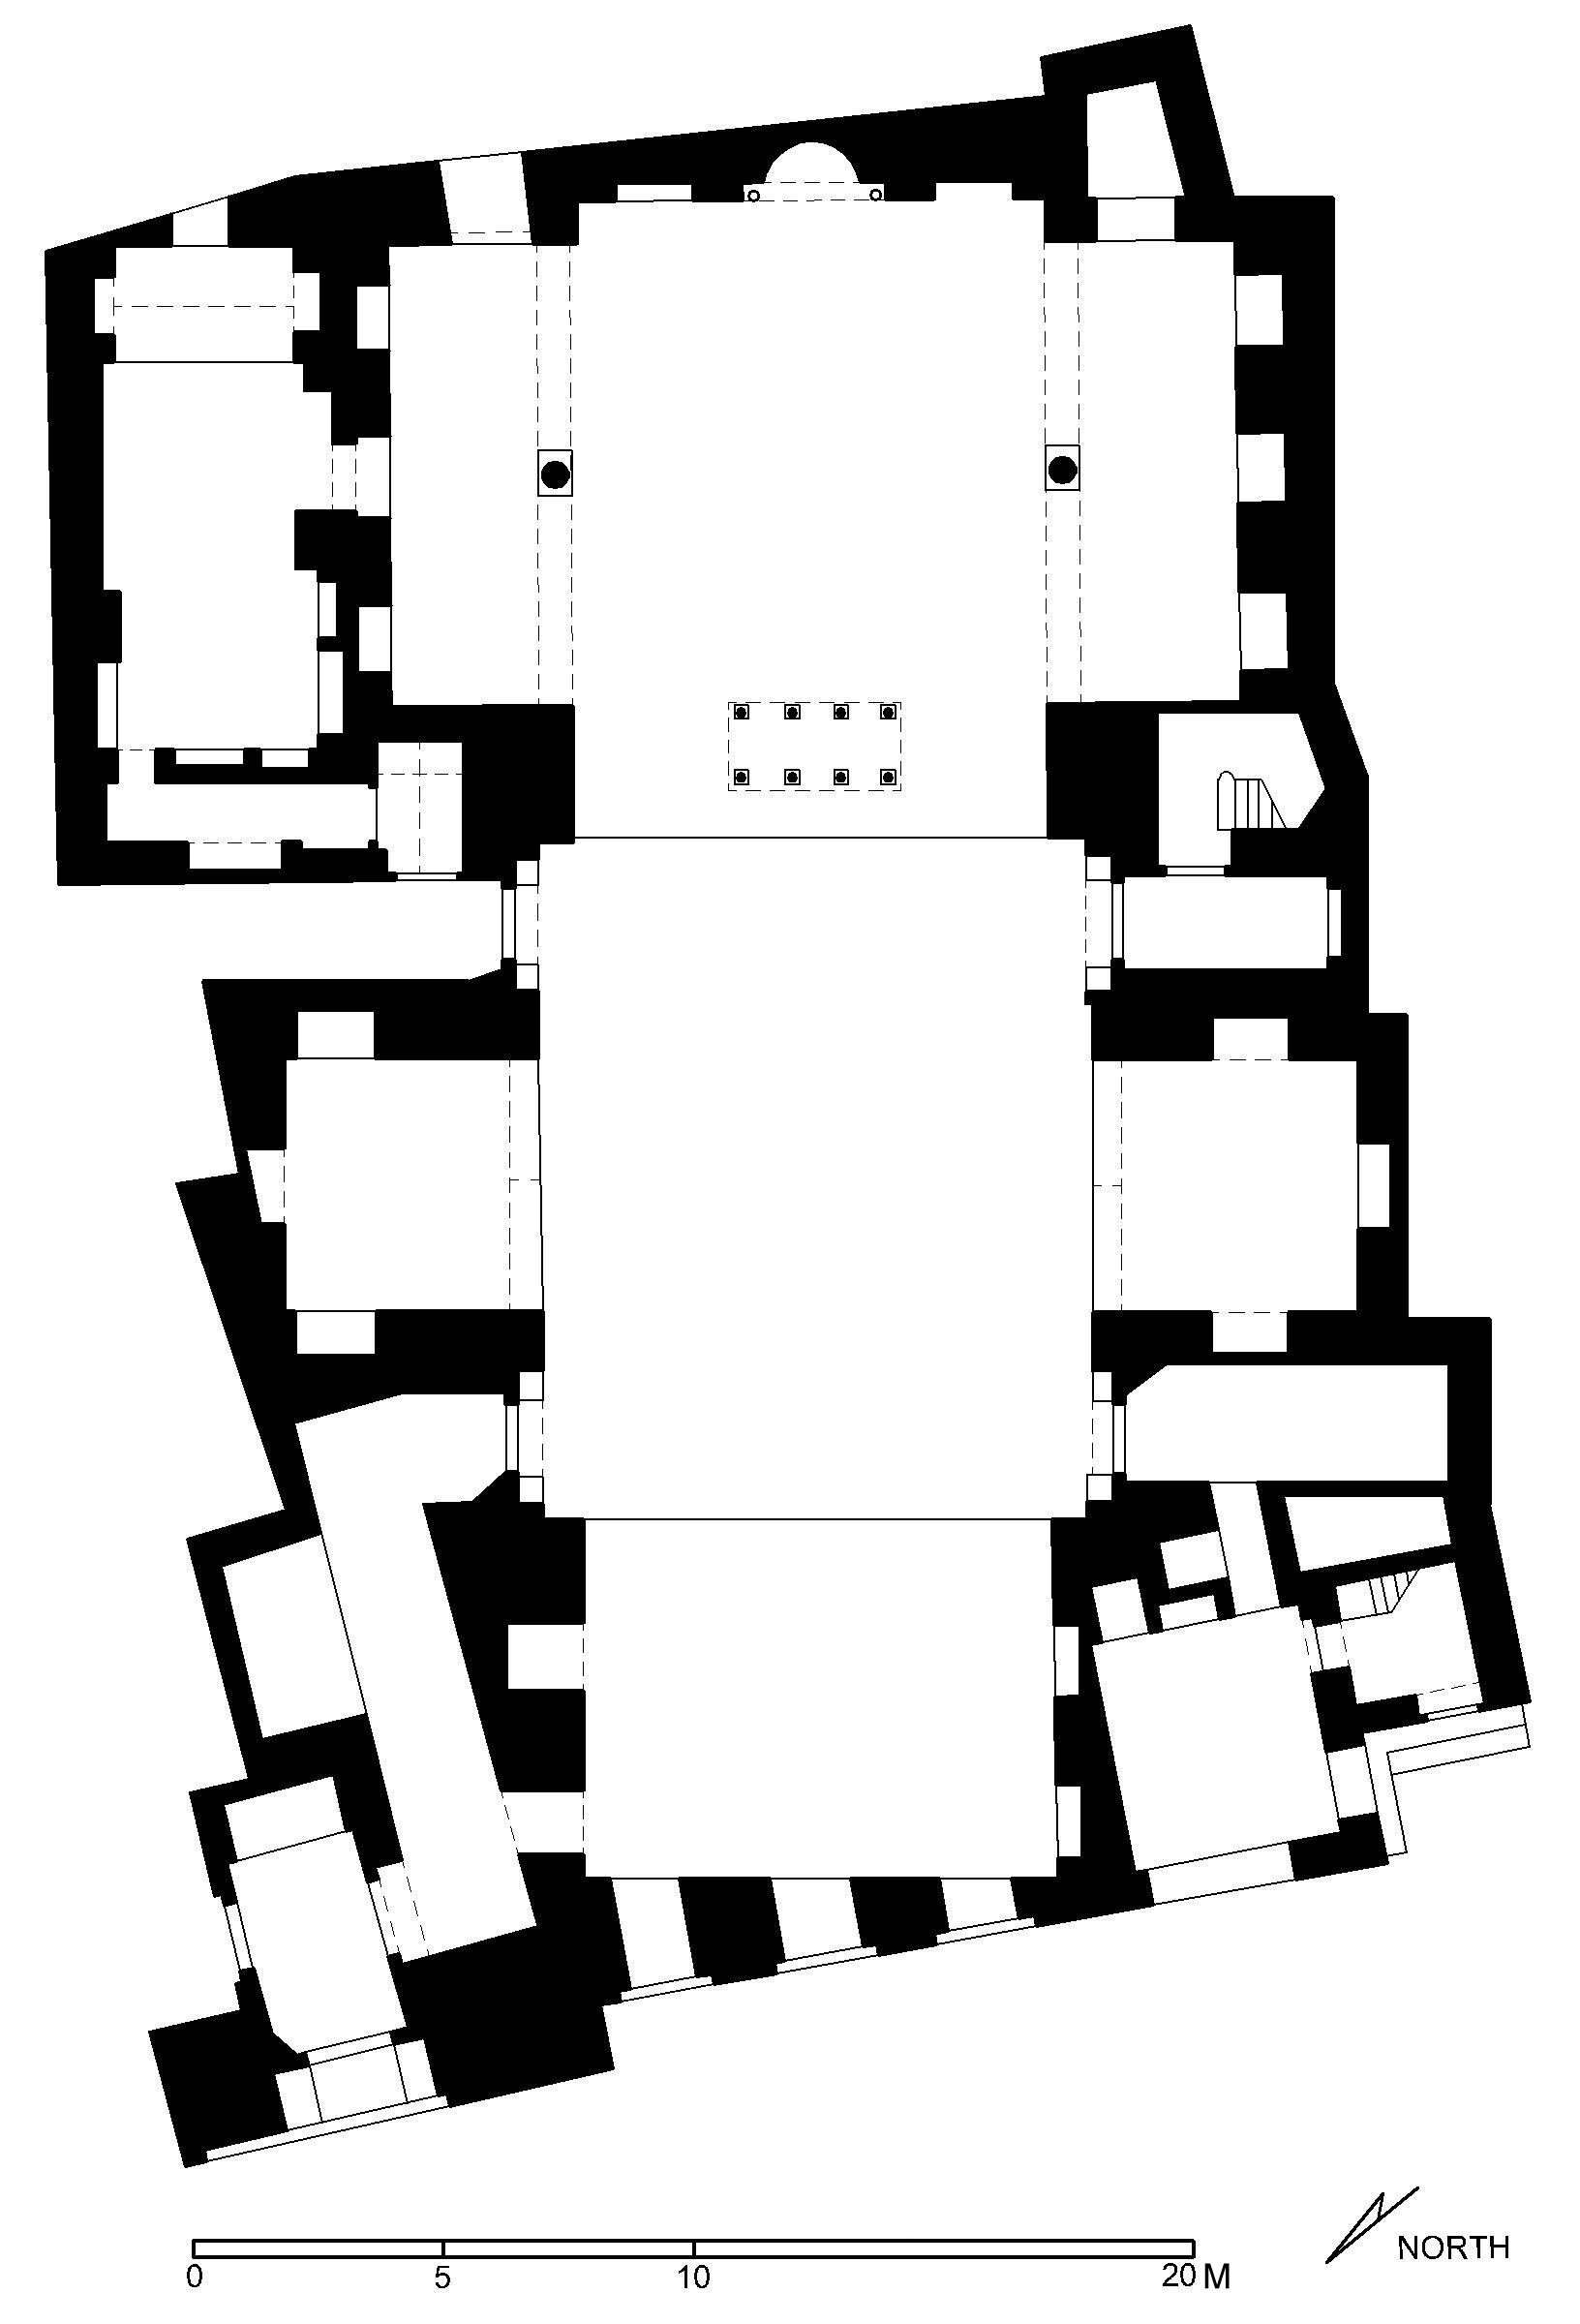 Masjid 'Abd al-Ghani al-Fakhri - Floor plan of mosque (after Meinecke) in AutoCAD 2000 format. Click the download button to download a zipped file containing the .dwg file. 